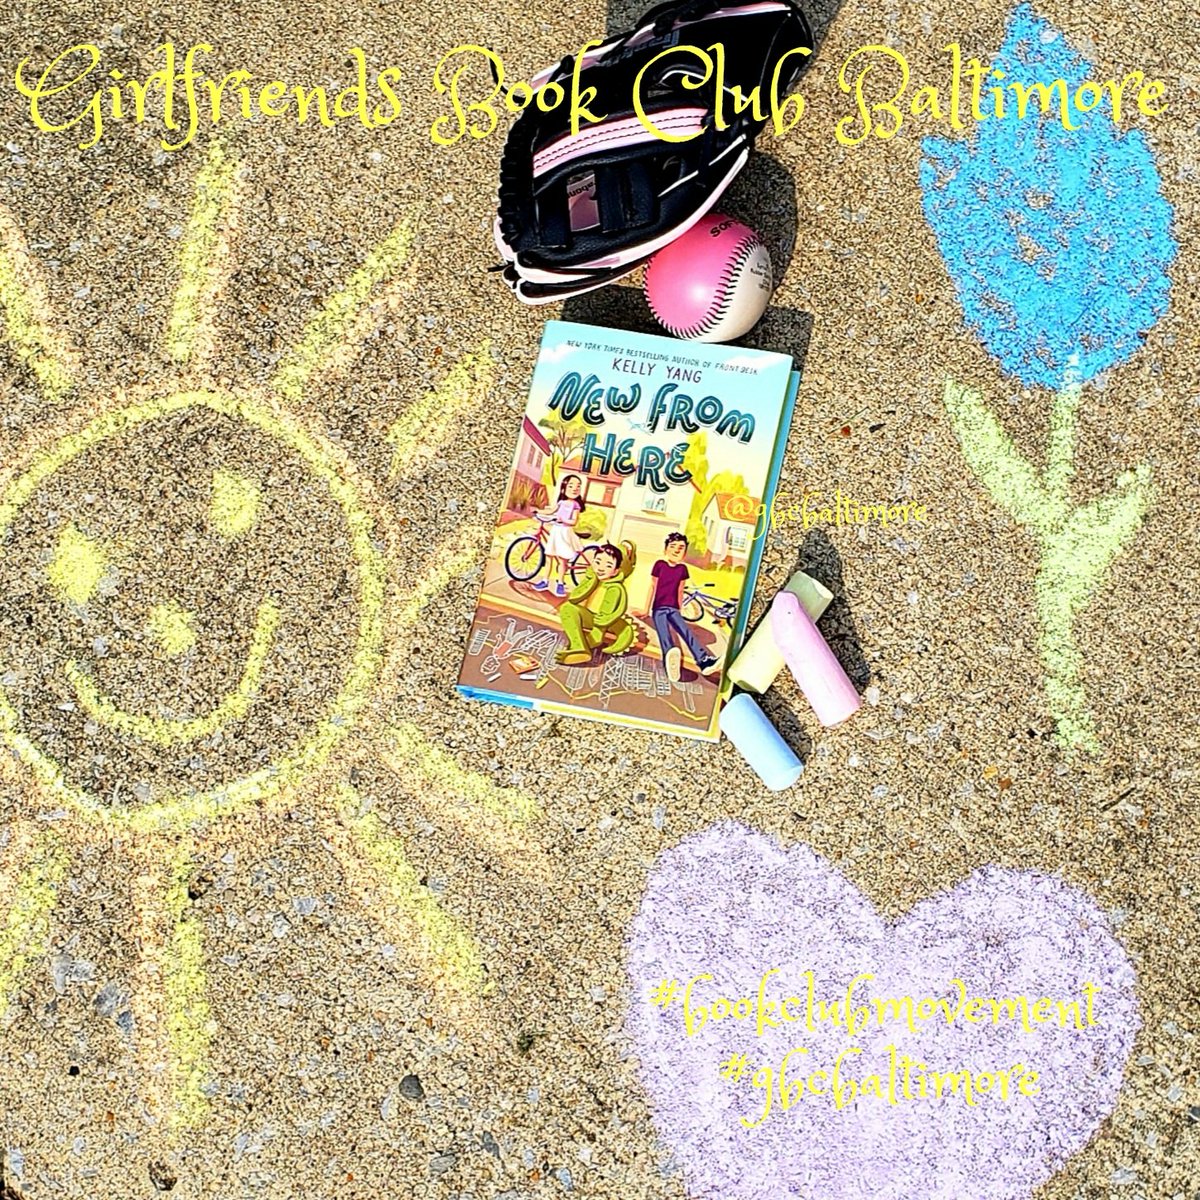 WE'RE READING...JOIN OUR #BOOKCLUBMOVEMENT 📚🌎 Click 
linktr.ee/gbcbaltimore to join a #book club that's abundant in valuable experiences & unique to any other!😎 #leaders #gbcbaltimore #GirlfriendsBookClubBaltimore #fun #reading #books #newfromhere #kellyyang #empower #friends